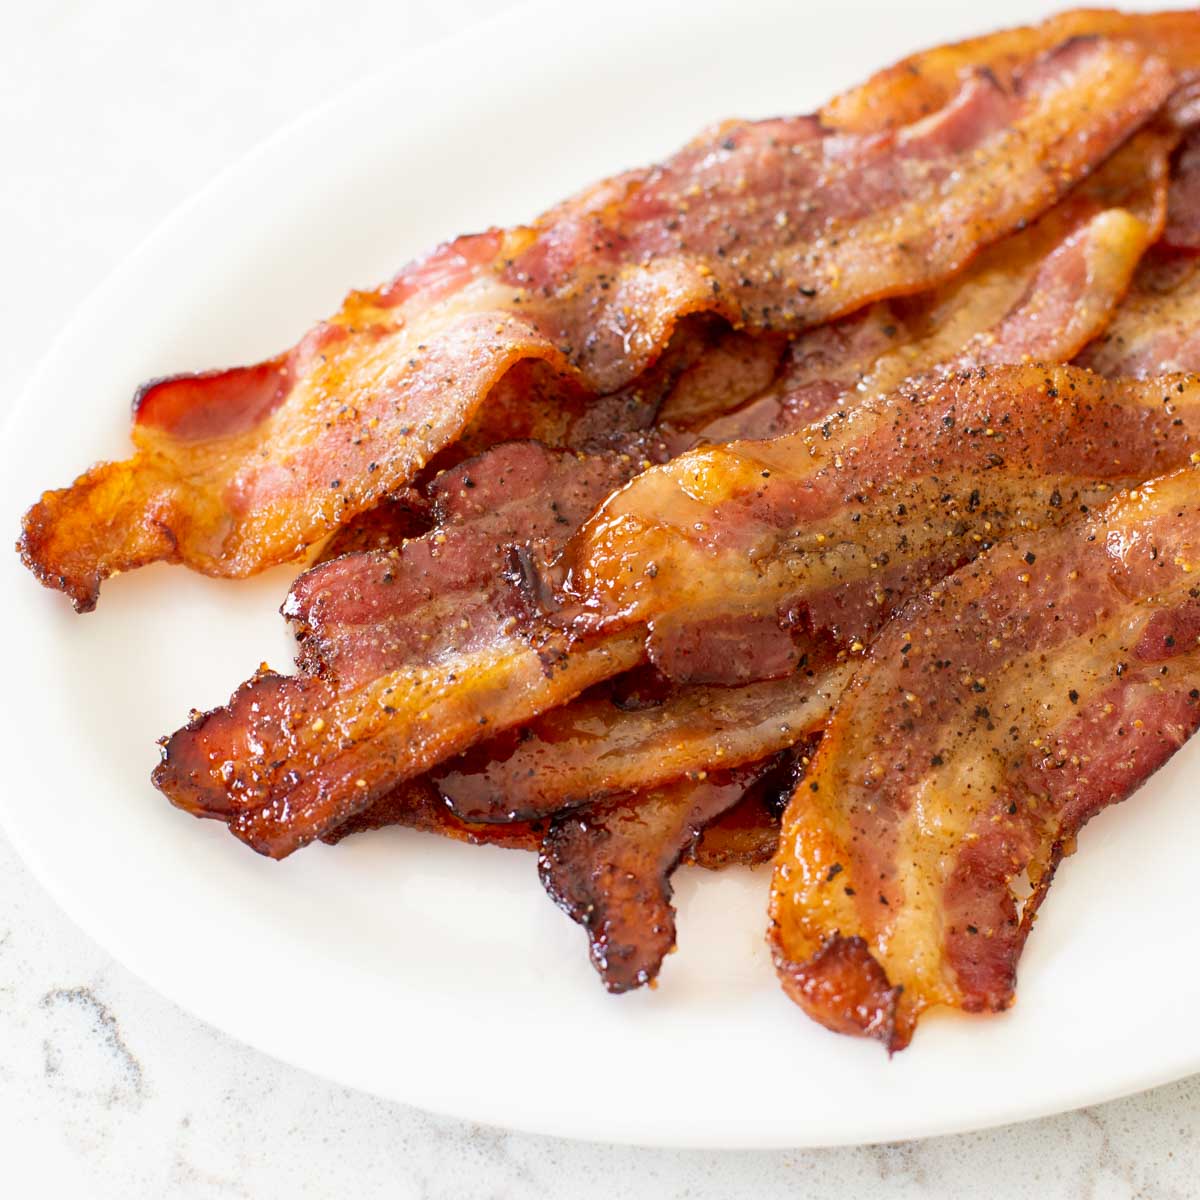 A platter of candied bacon with pepper is ready to serve.